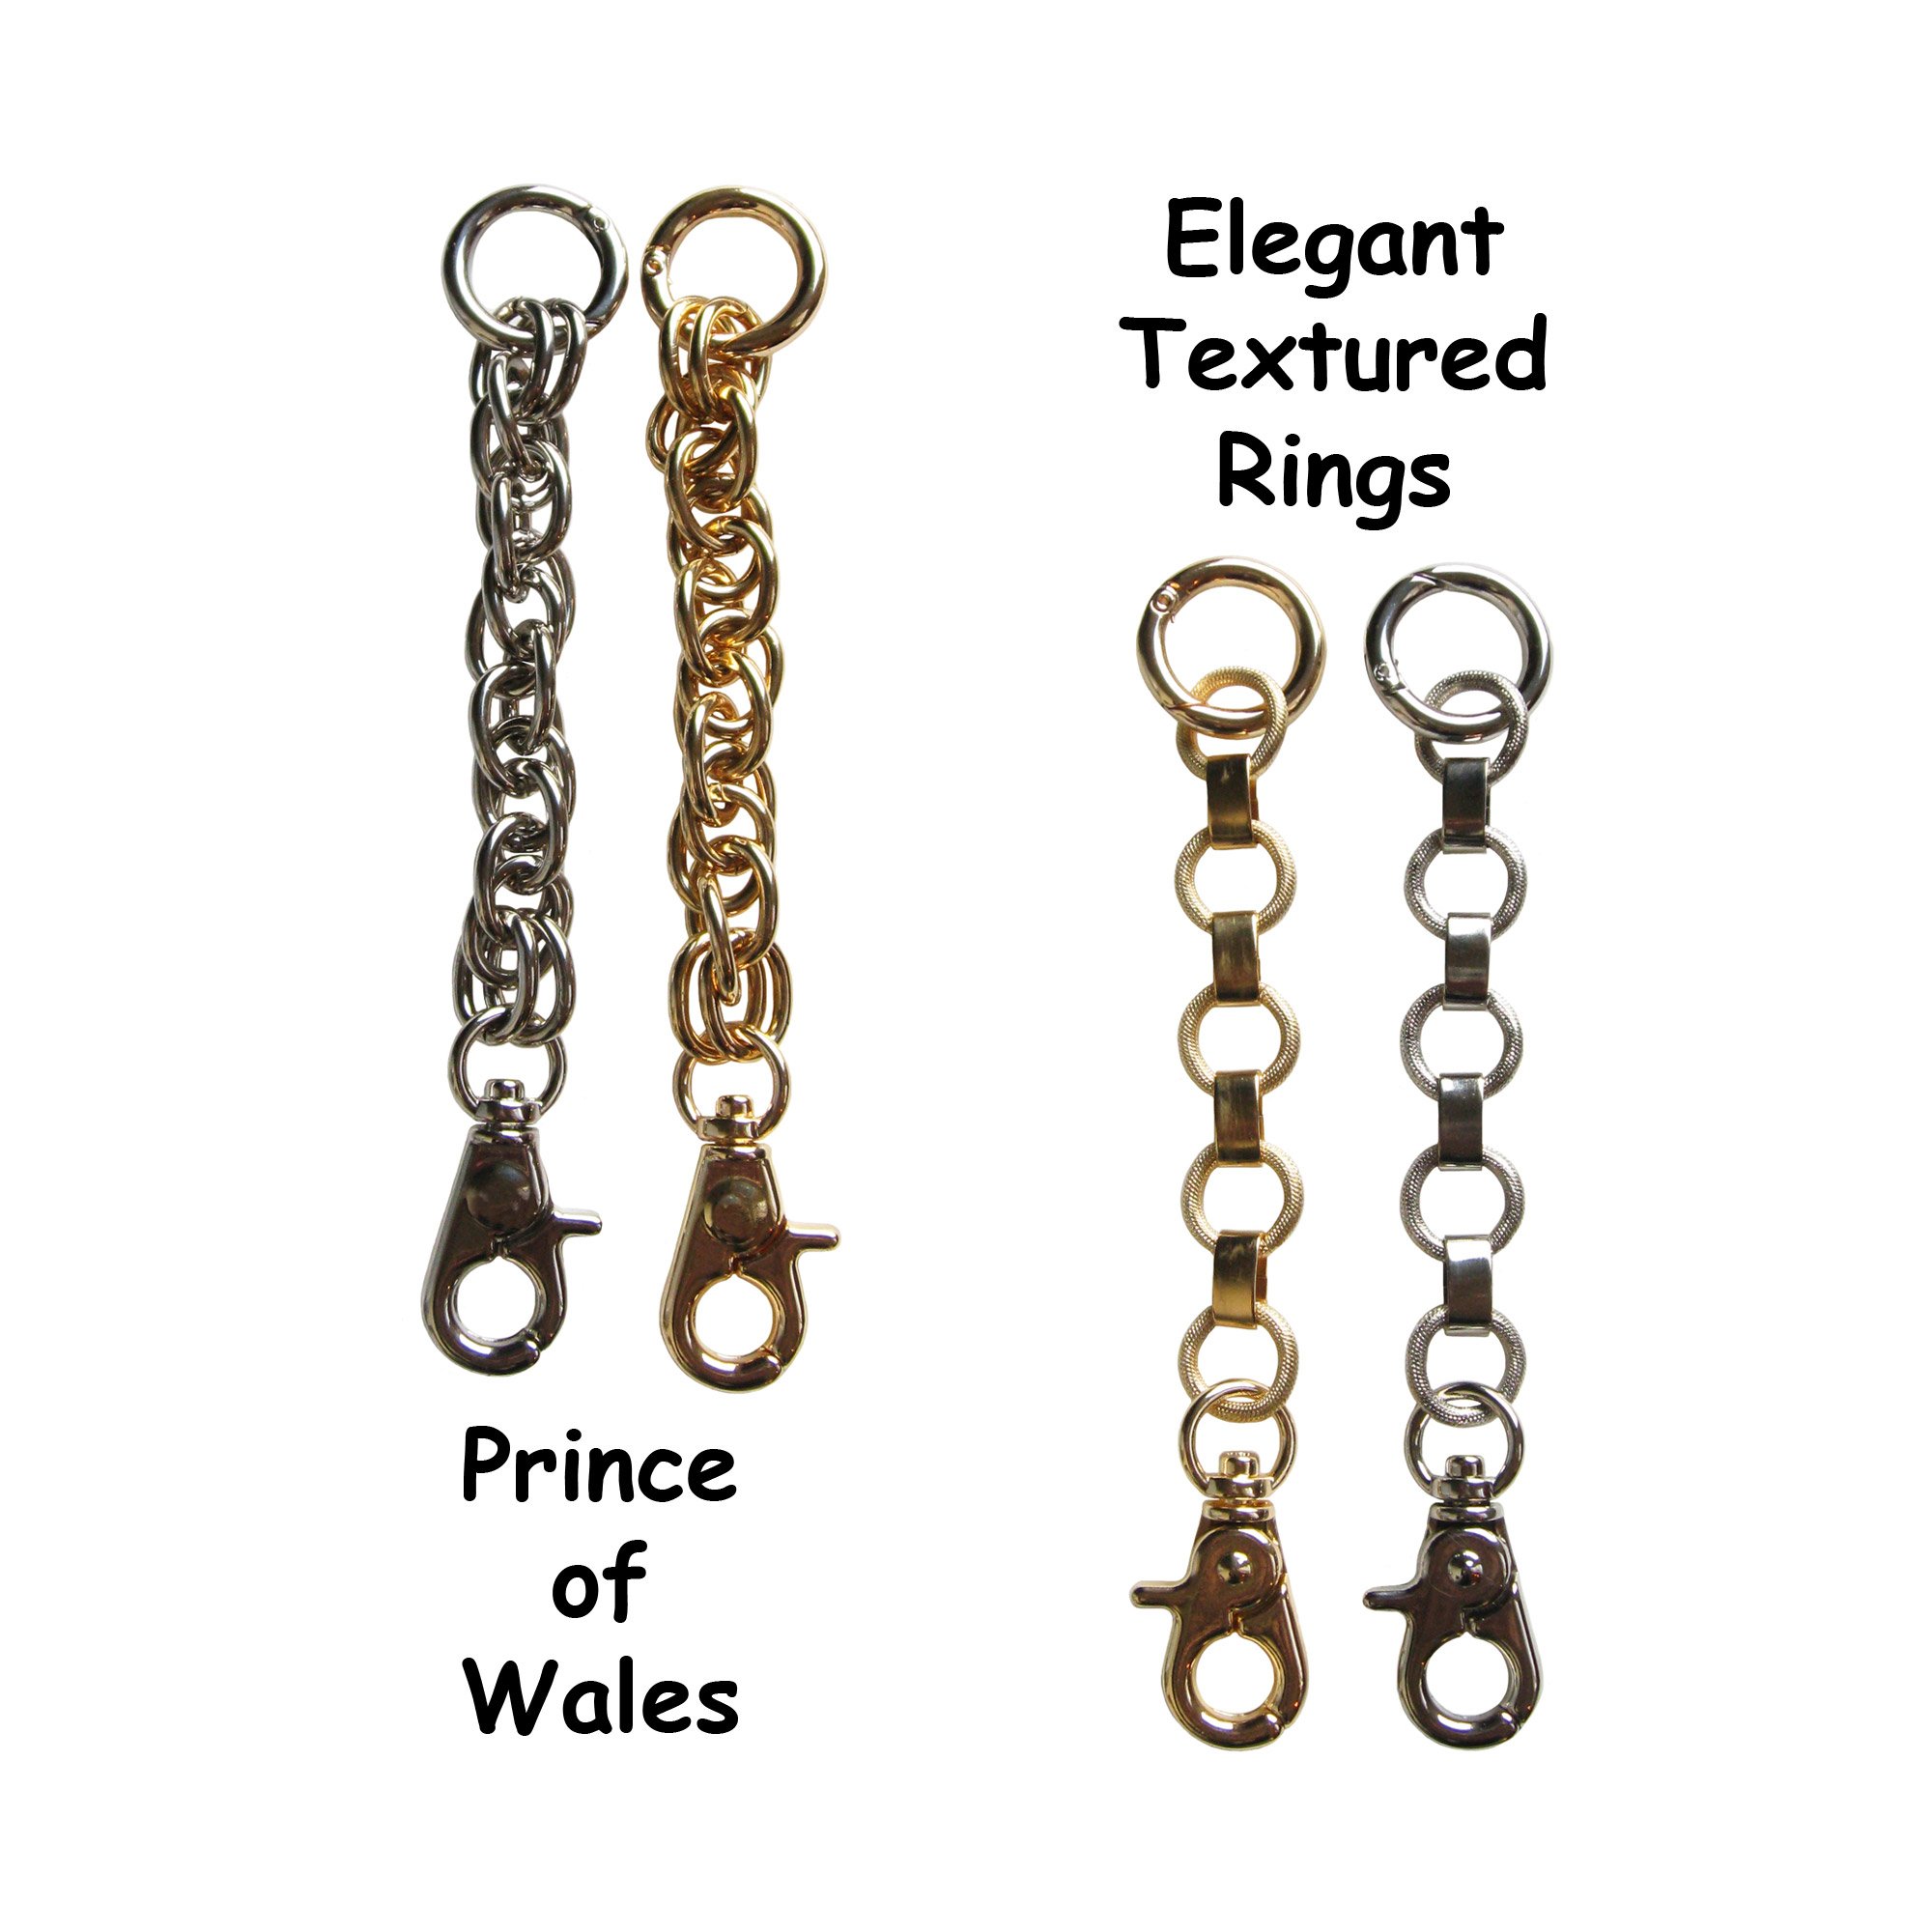 Chain Strap Extender Handbag Accessory with Purse Keyring Tether